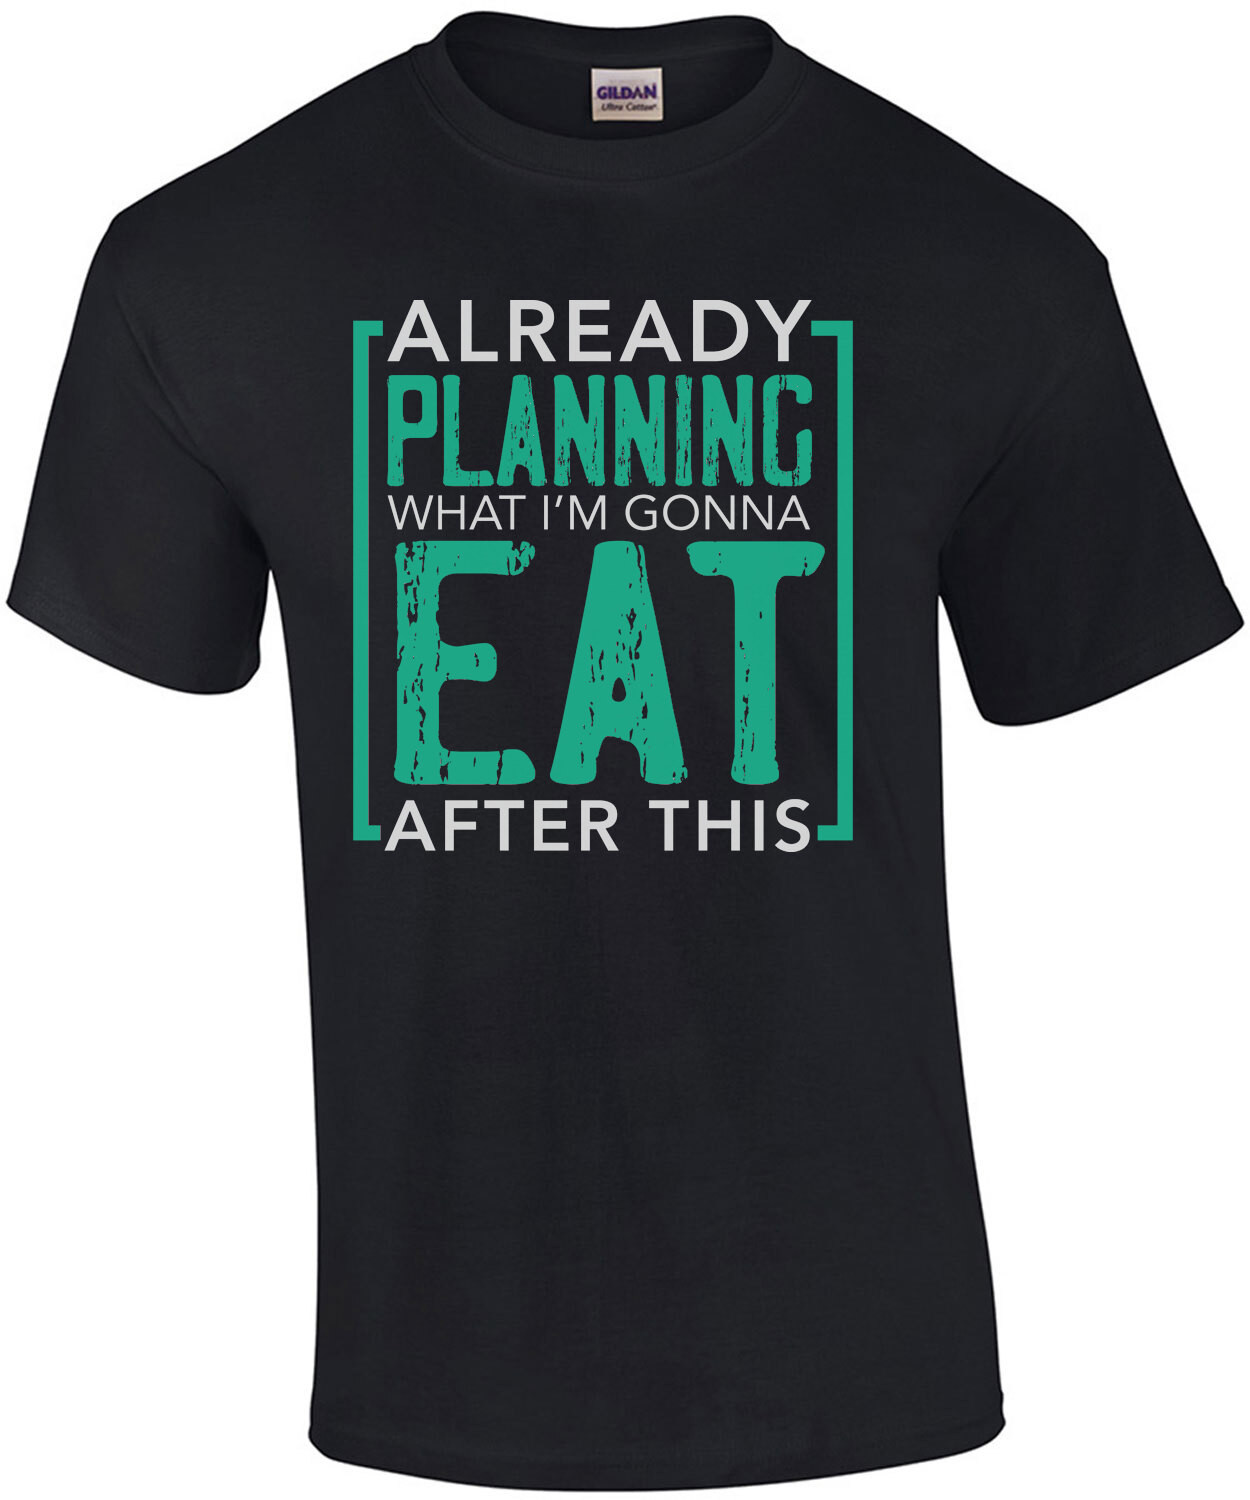 Already planning what I'm gonna eat after this - fat t-shirt